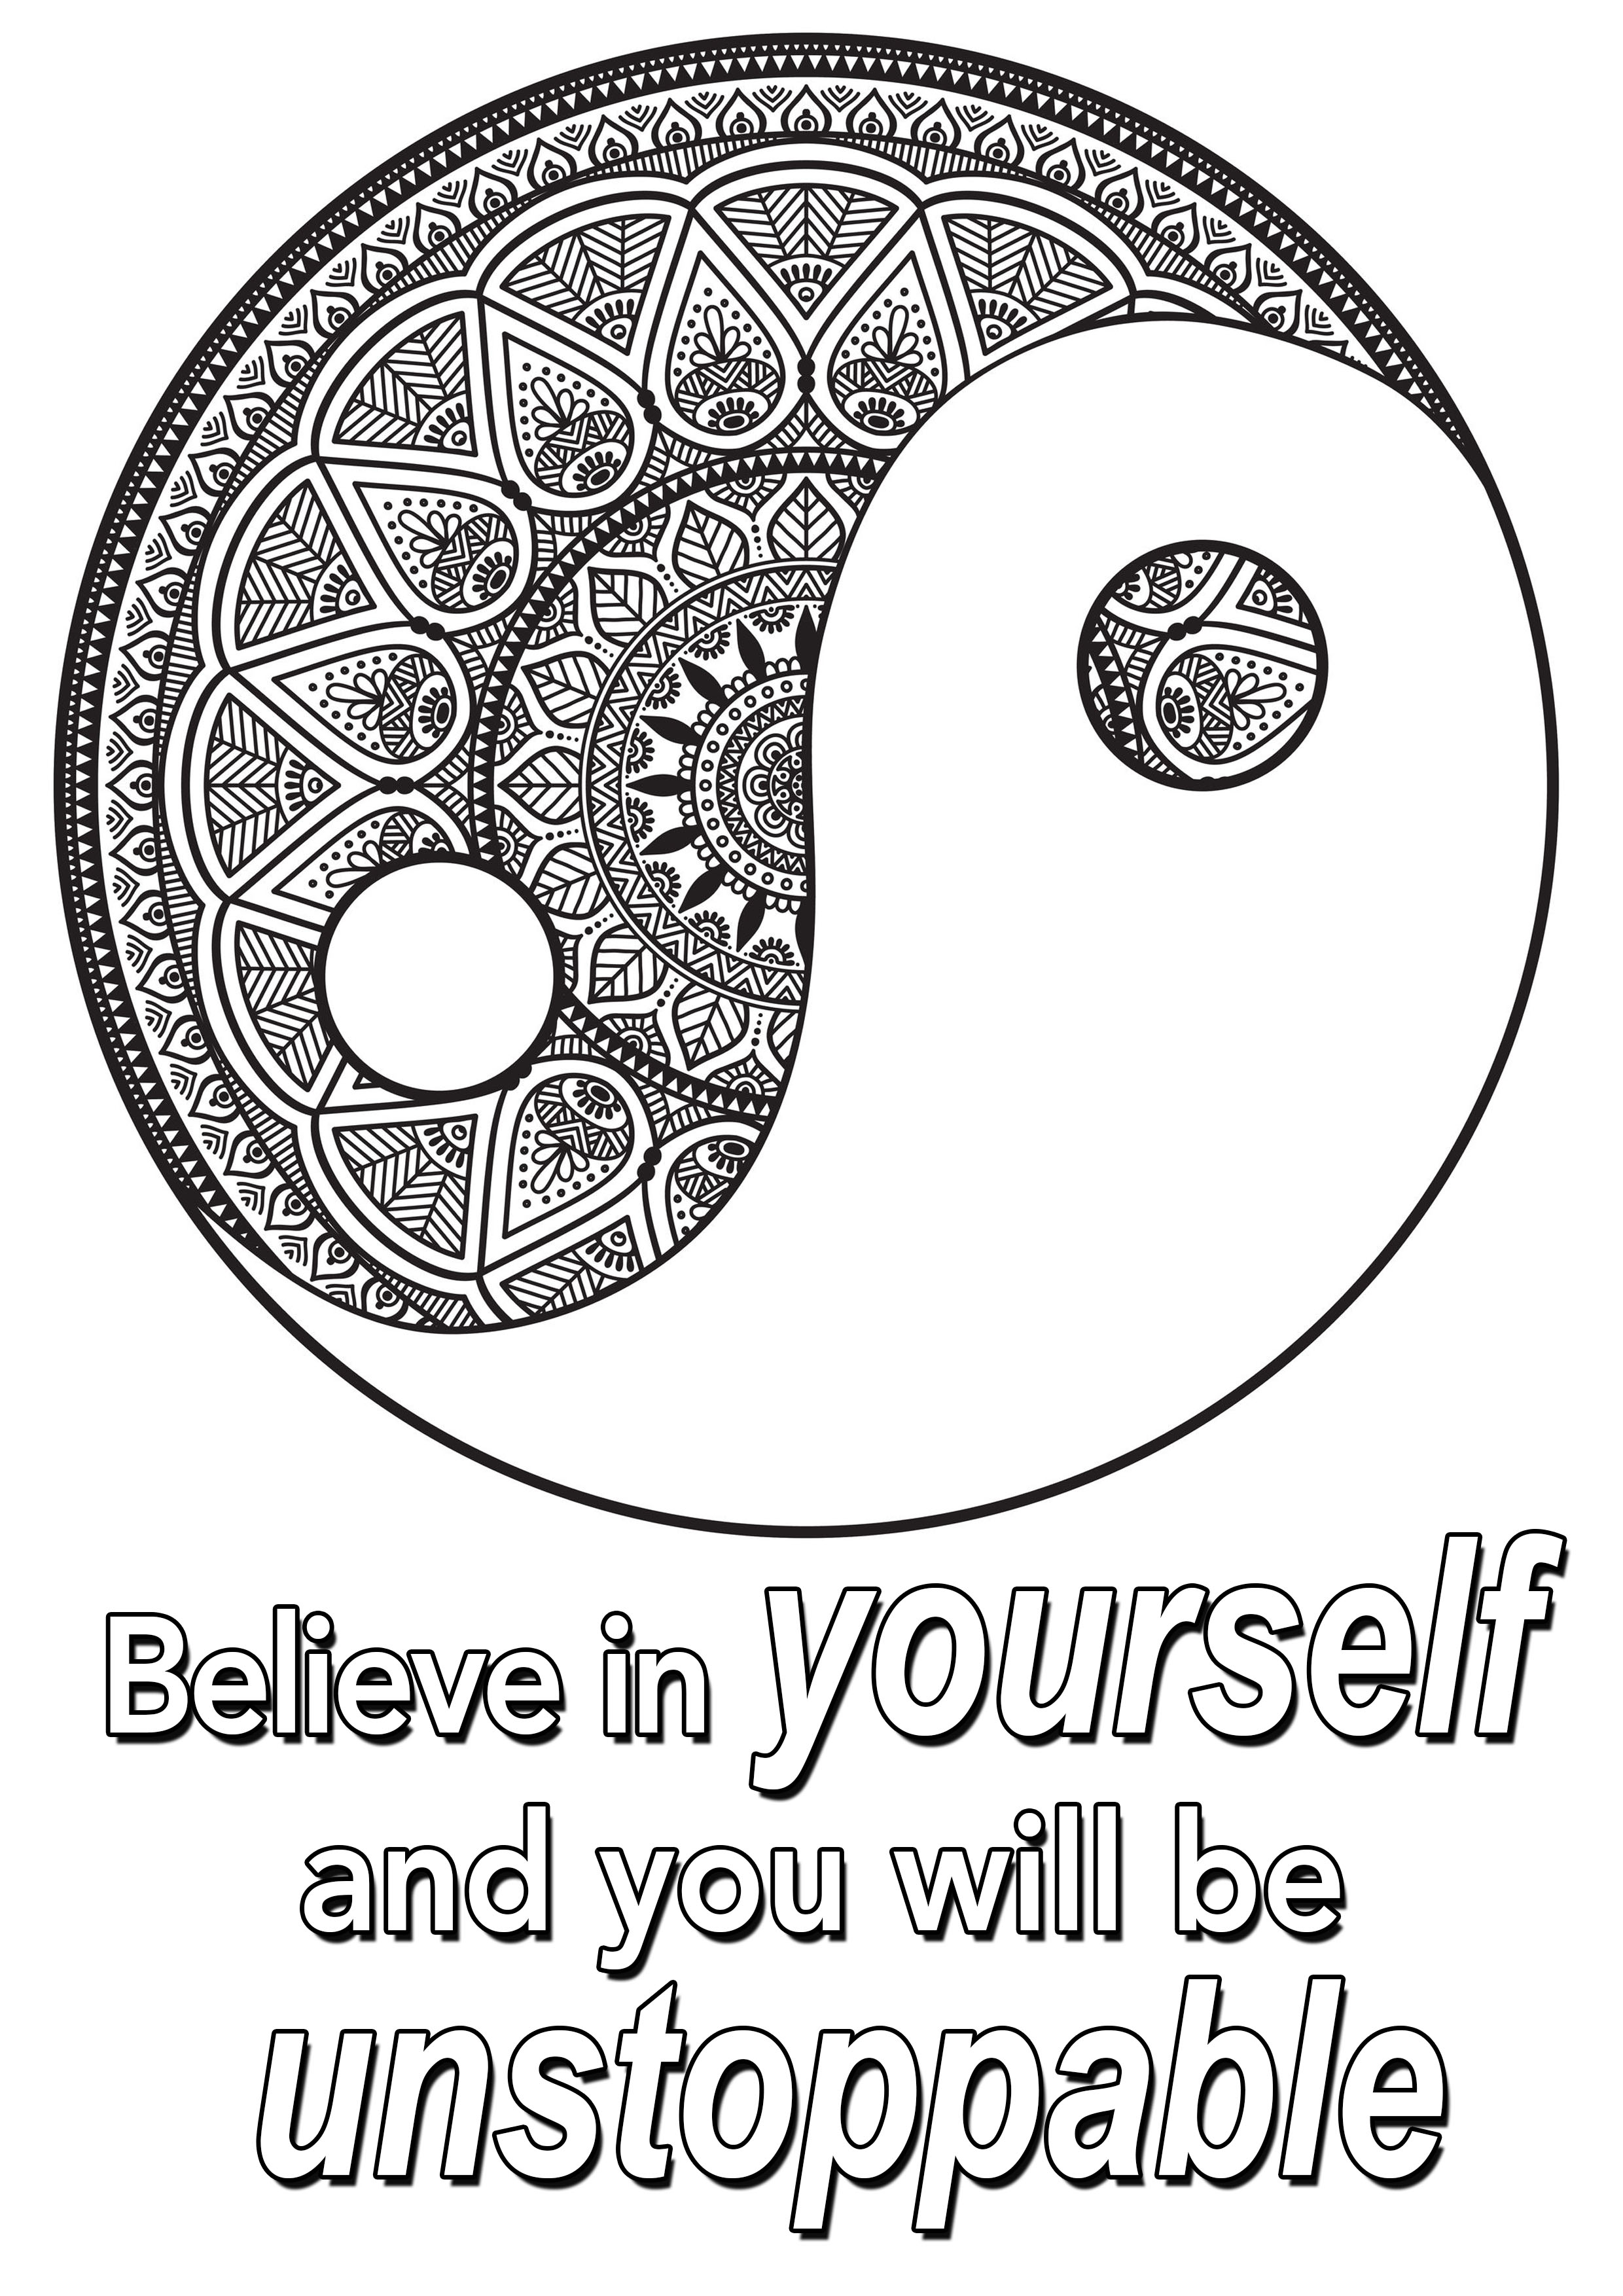 'Believe in yourself and you will be unstoppable' : A quote to color, with a Yin & Yang symbol full of beautiful patterns